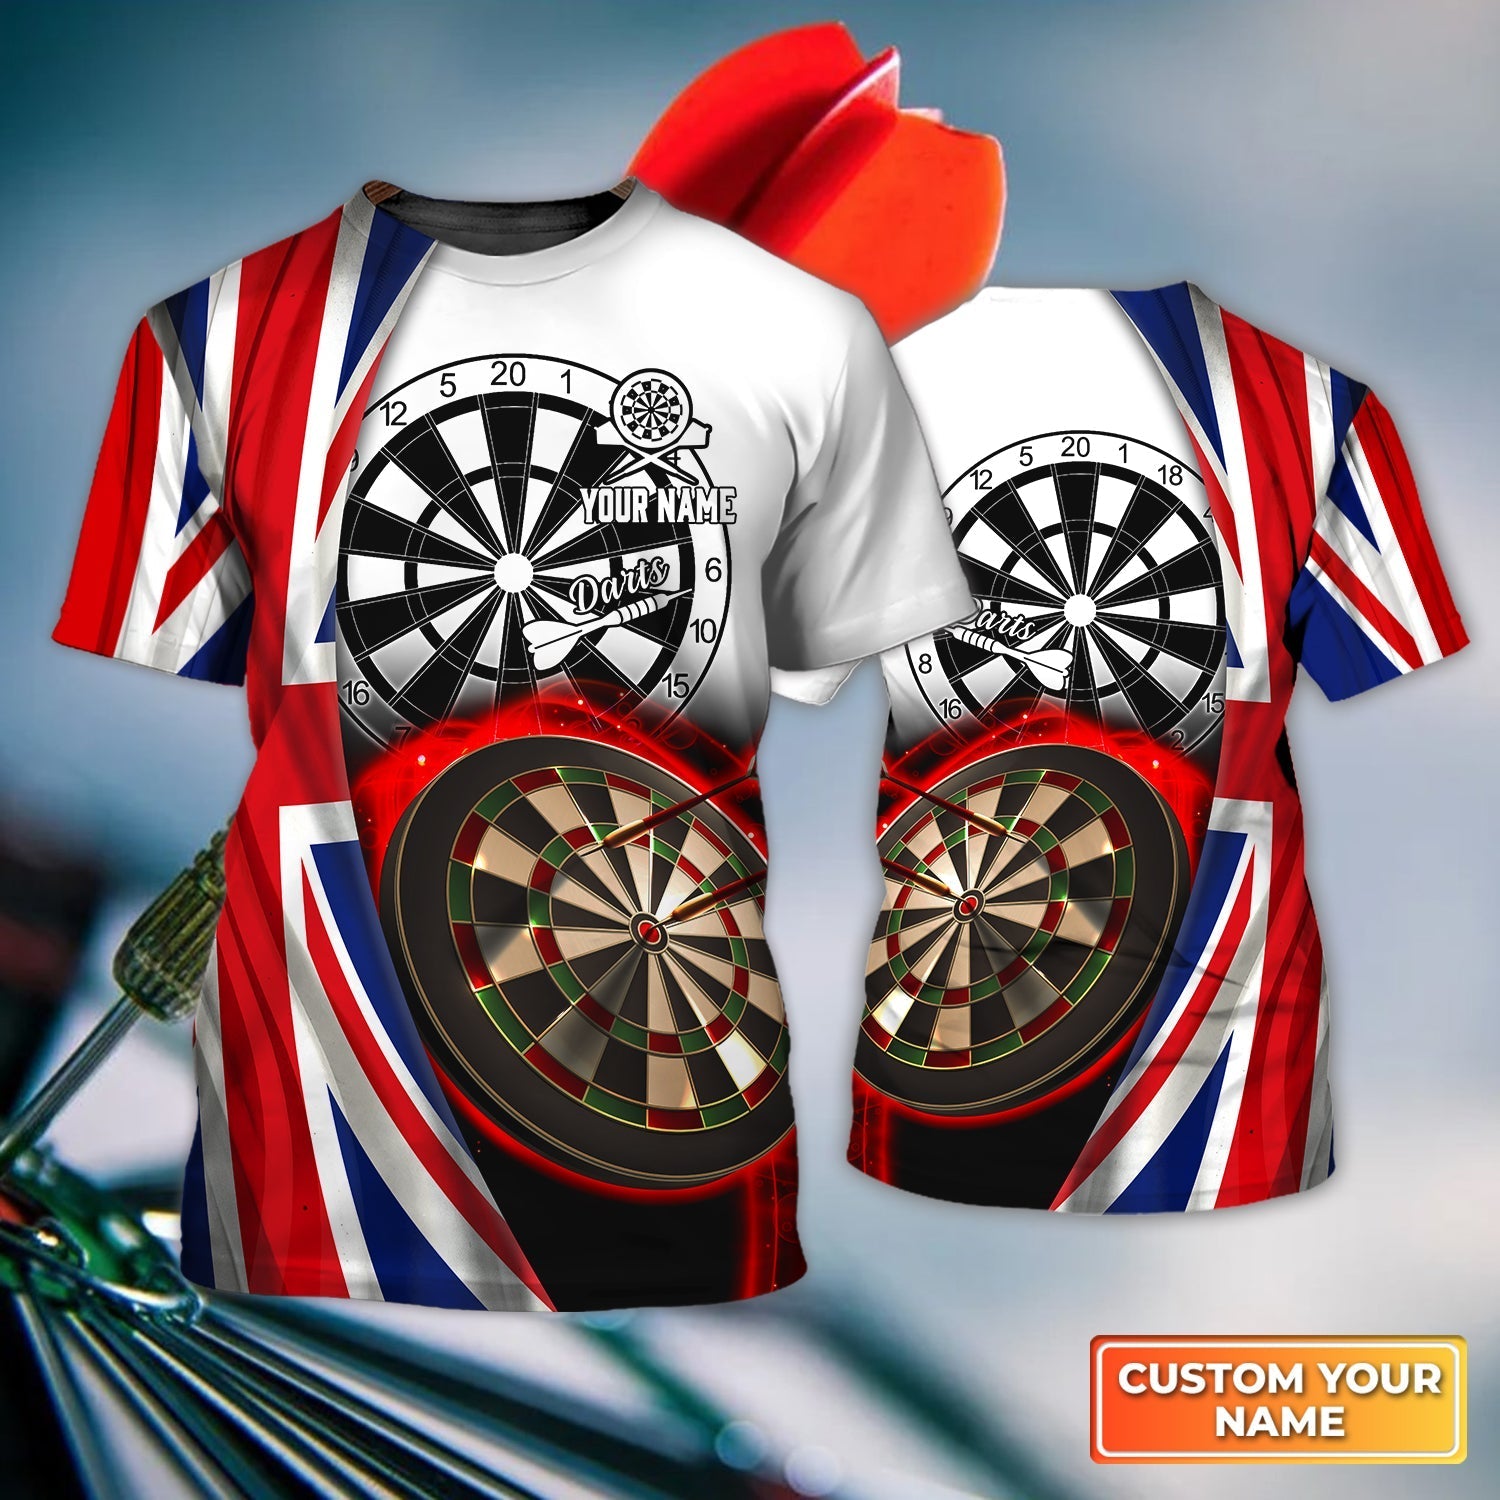 Turquoise Darts 3D all printed shirt for men, Personalized Name 3D Tshirt For Darts Player – DT109